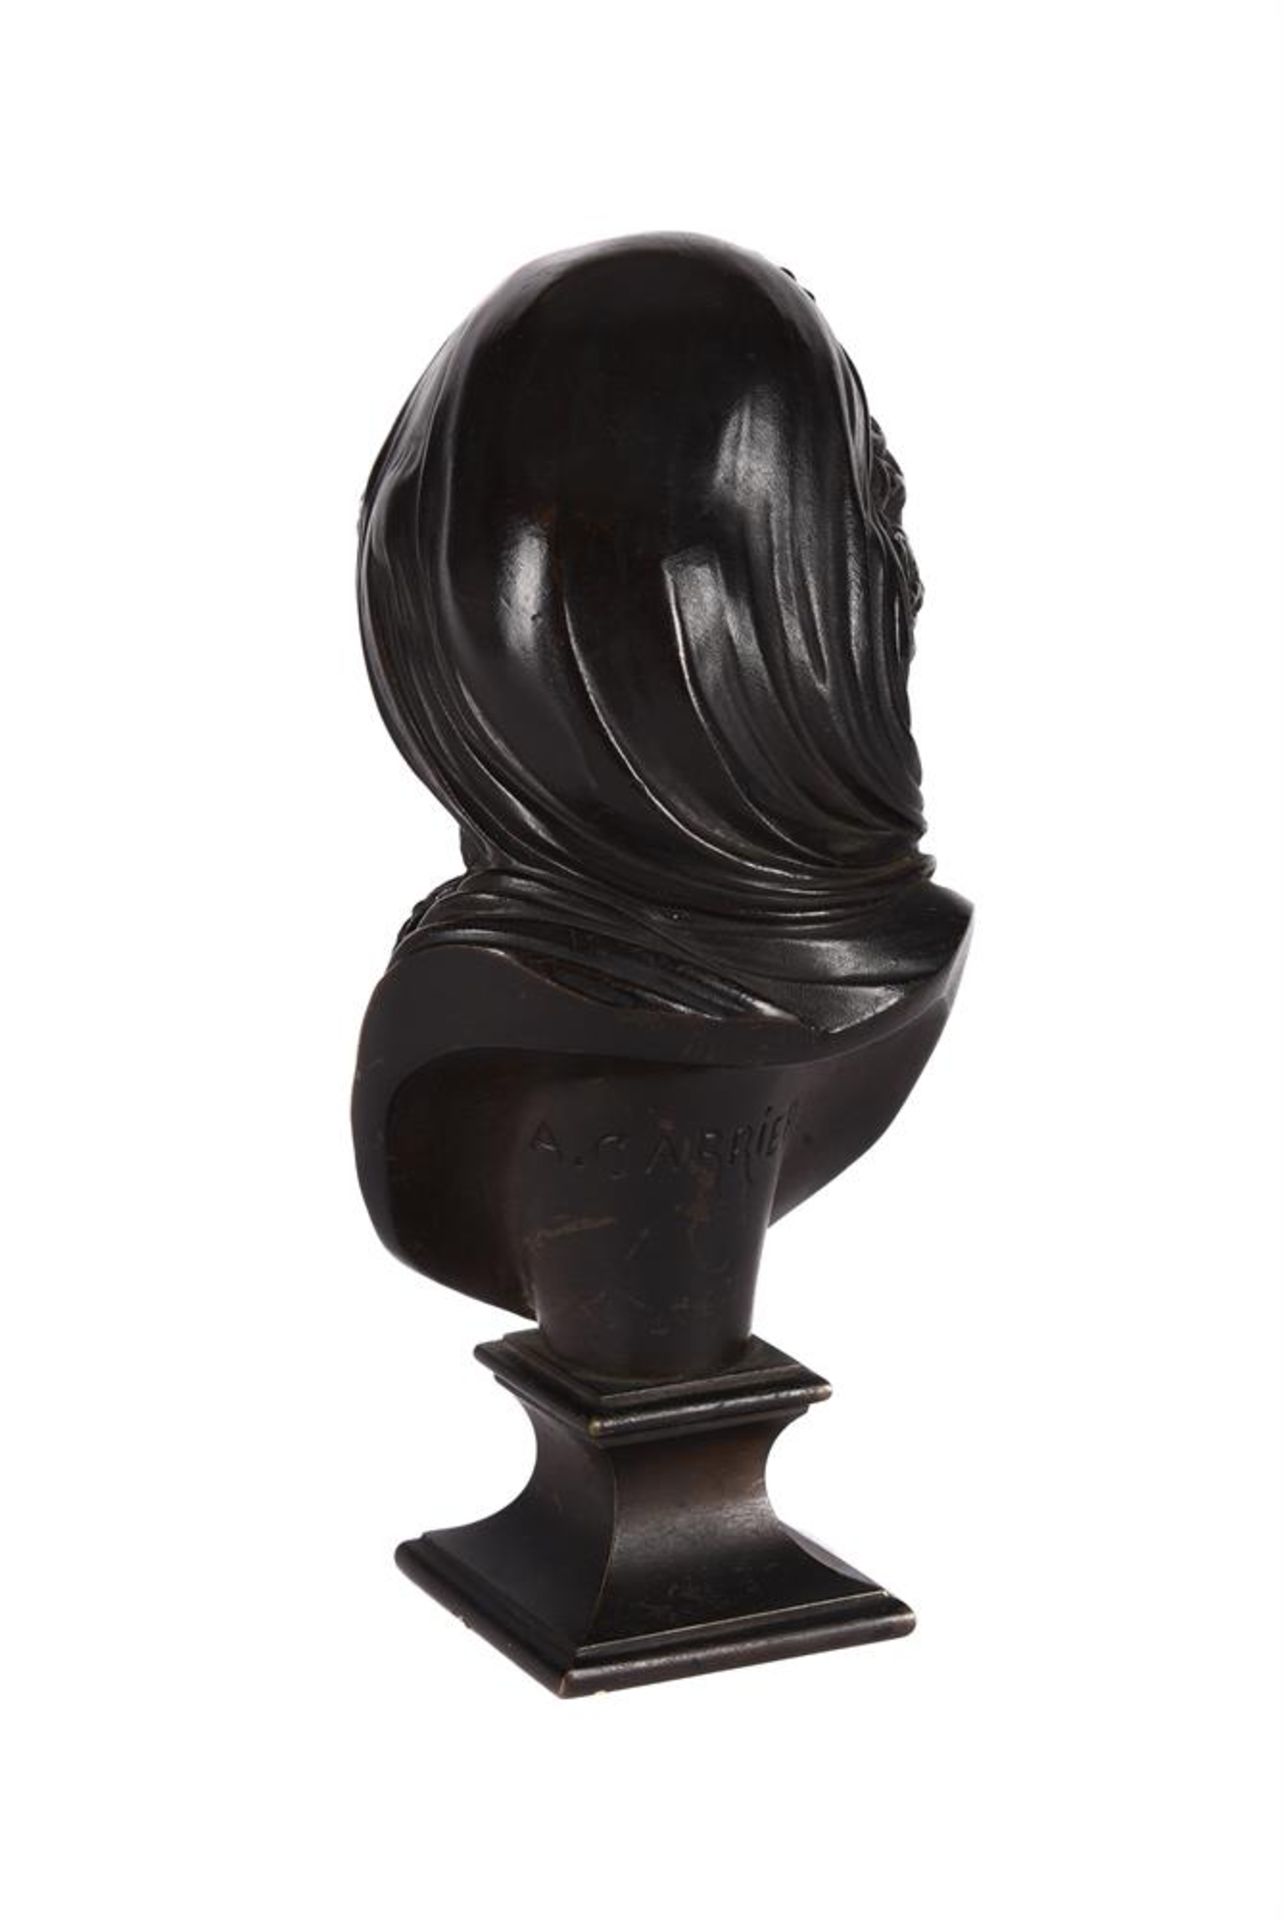 AFTER ALBERT CARRIER BELLEUSE (FRENCH 1824-1887), BRONZE BUST OF A WOMAN - Image 2 of 3